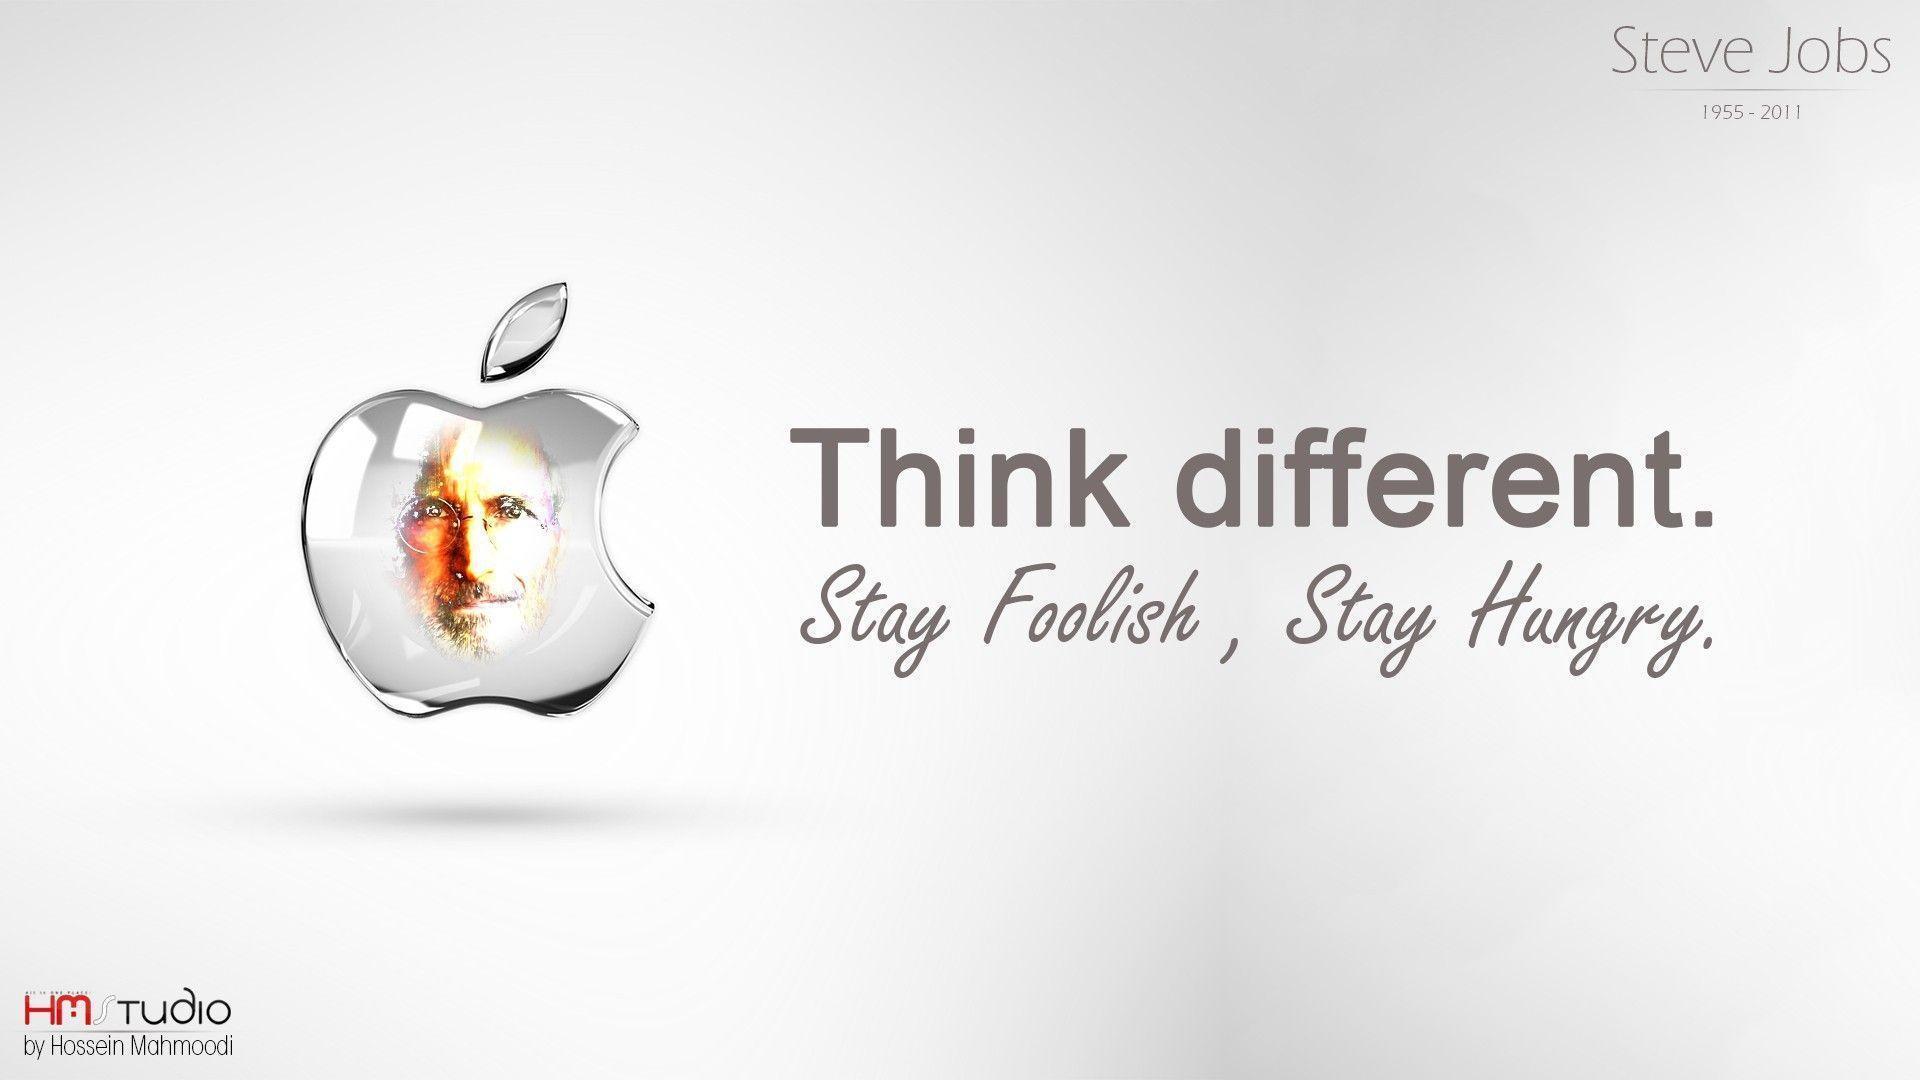 Advertising Apple wallpaper and image, picture, photo